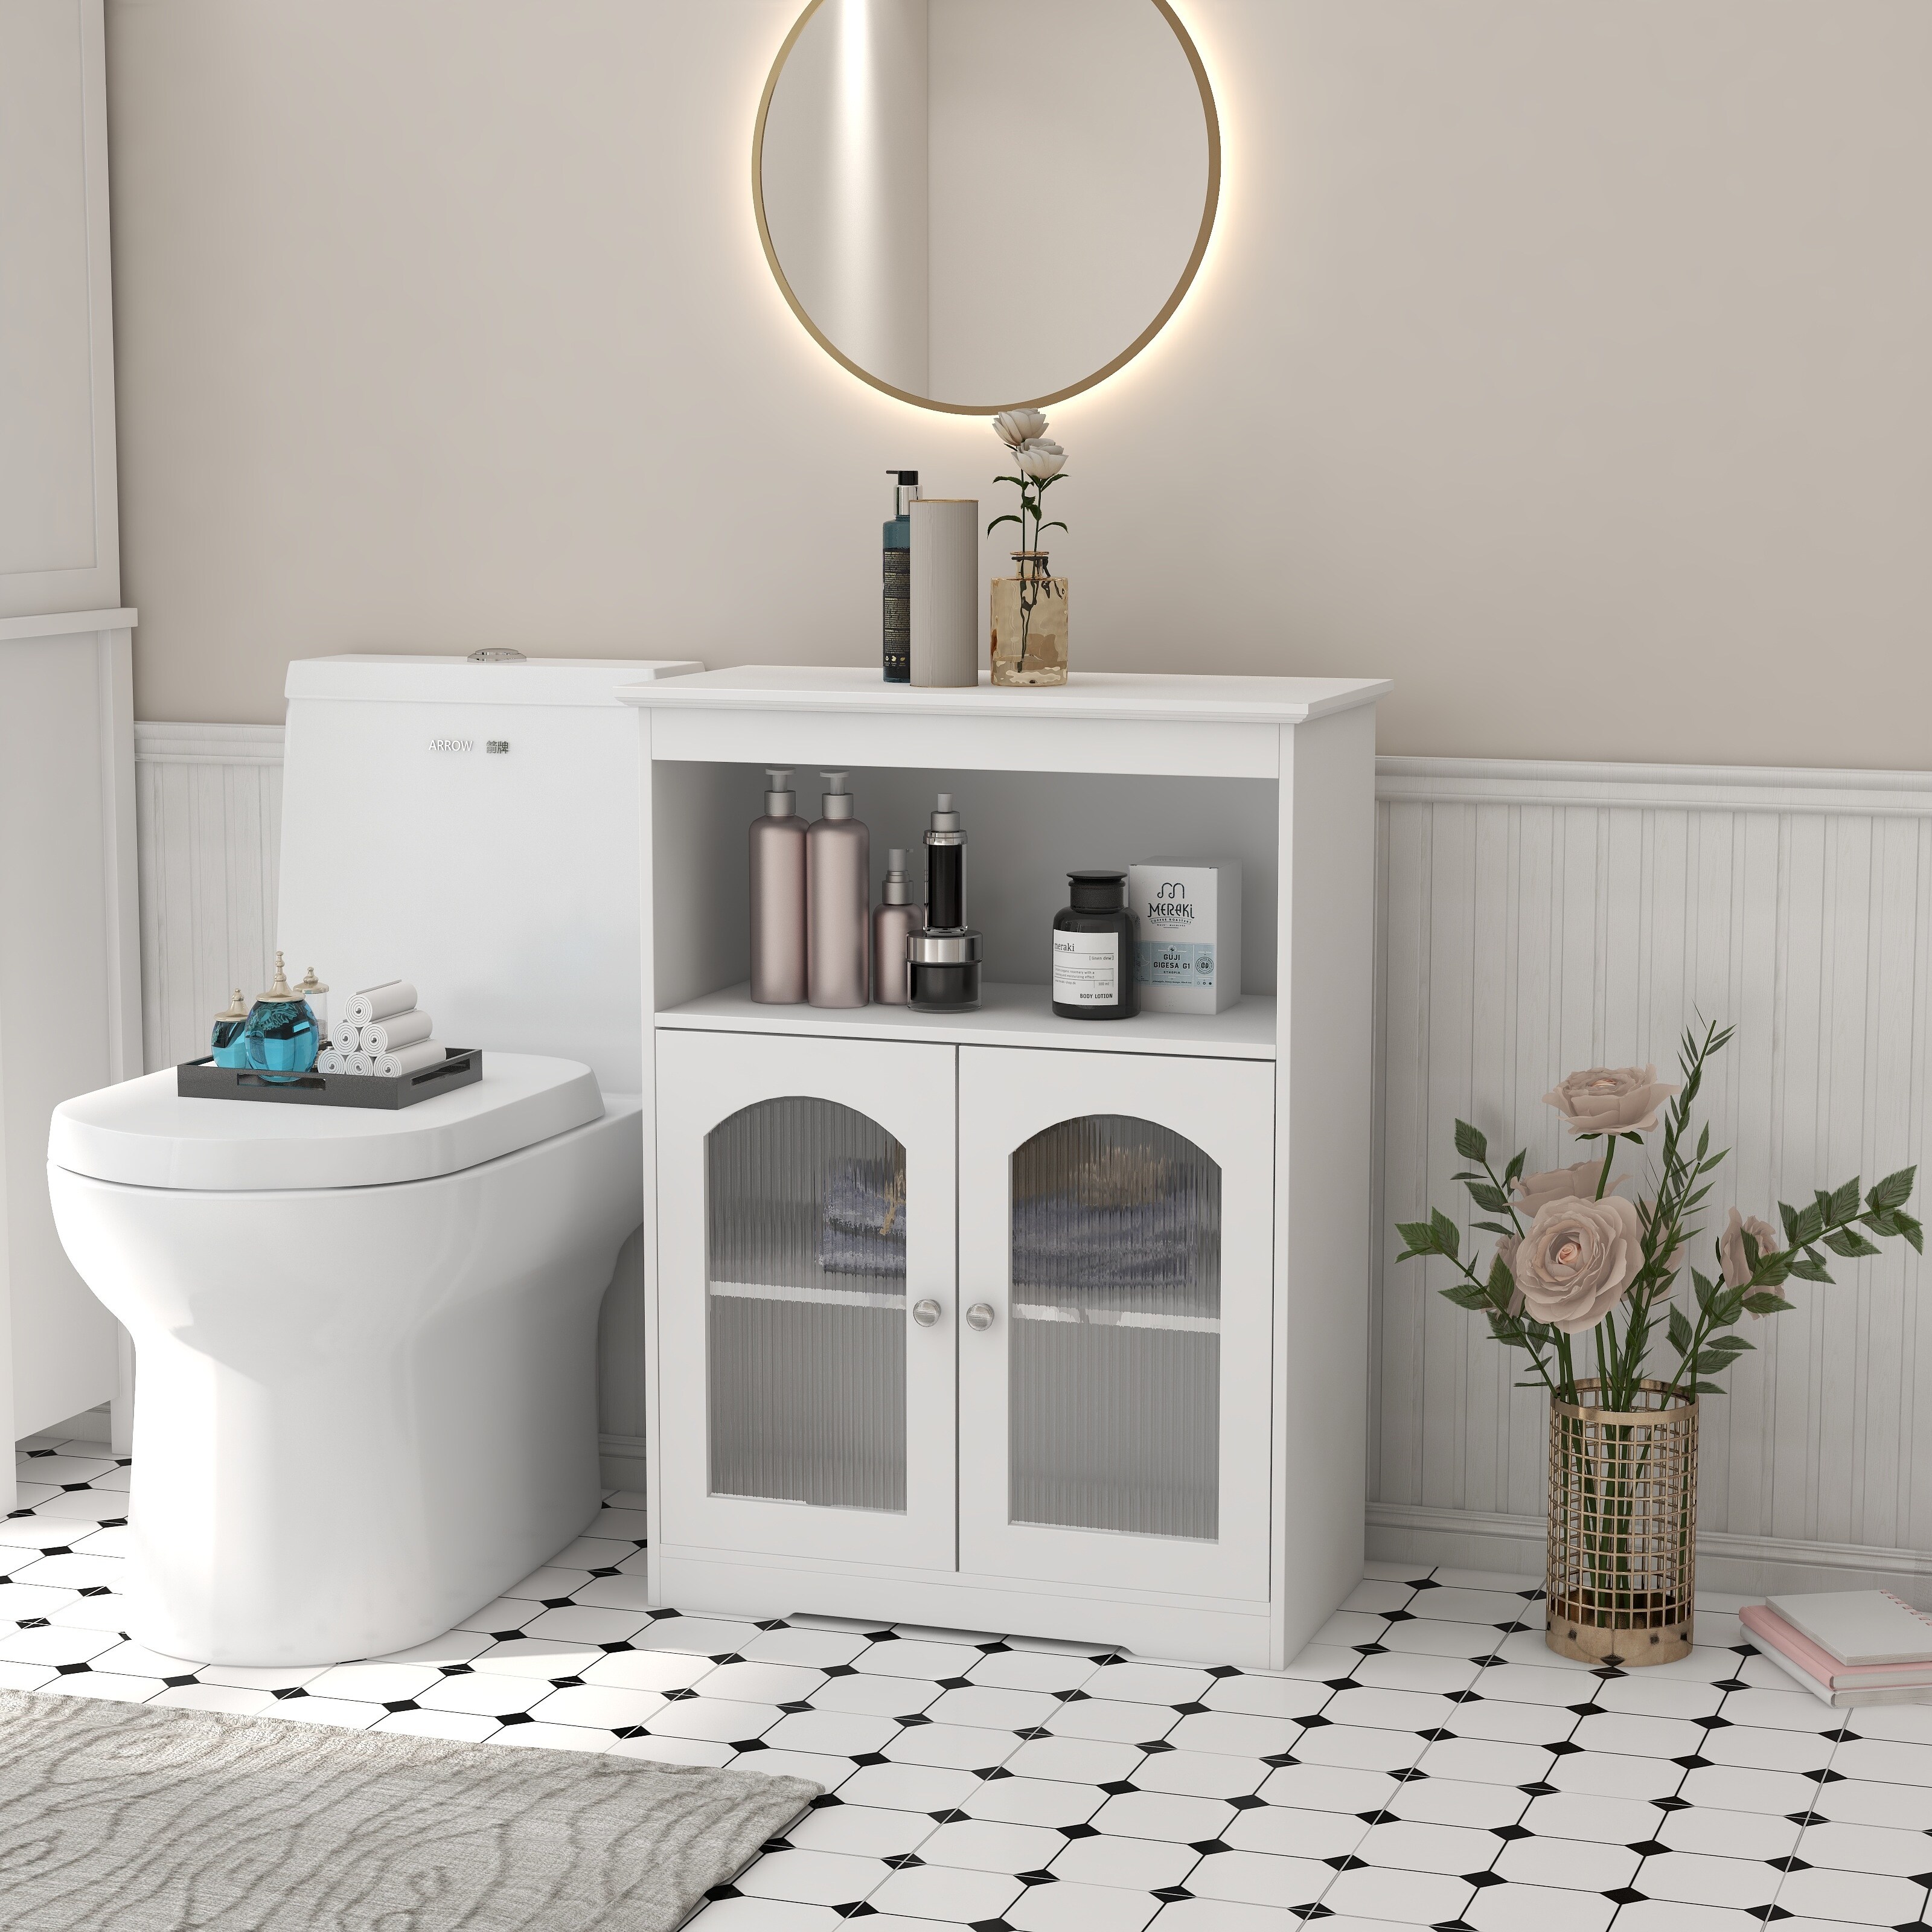 https://ak1.ostkcdn.com/images/products/is/images/direct/830bcc1b97e87e5948b98a14e7d6d3551e93017d/White-Bathroom-Cabinet-with-Glass.jpg